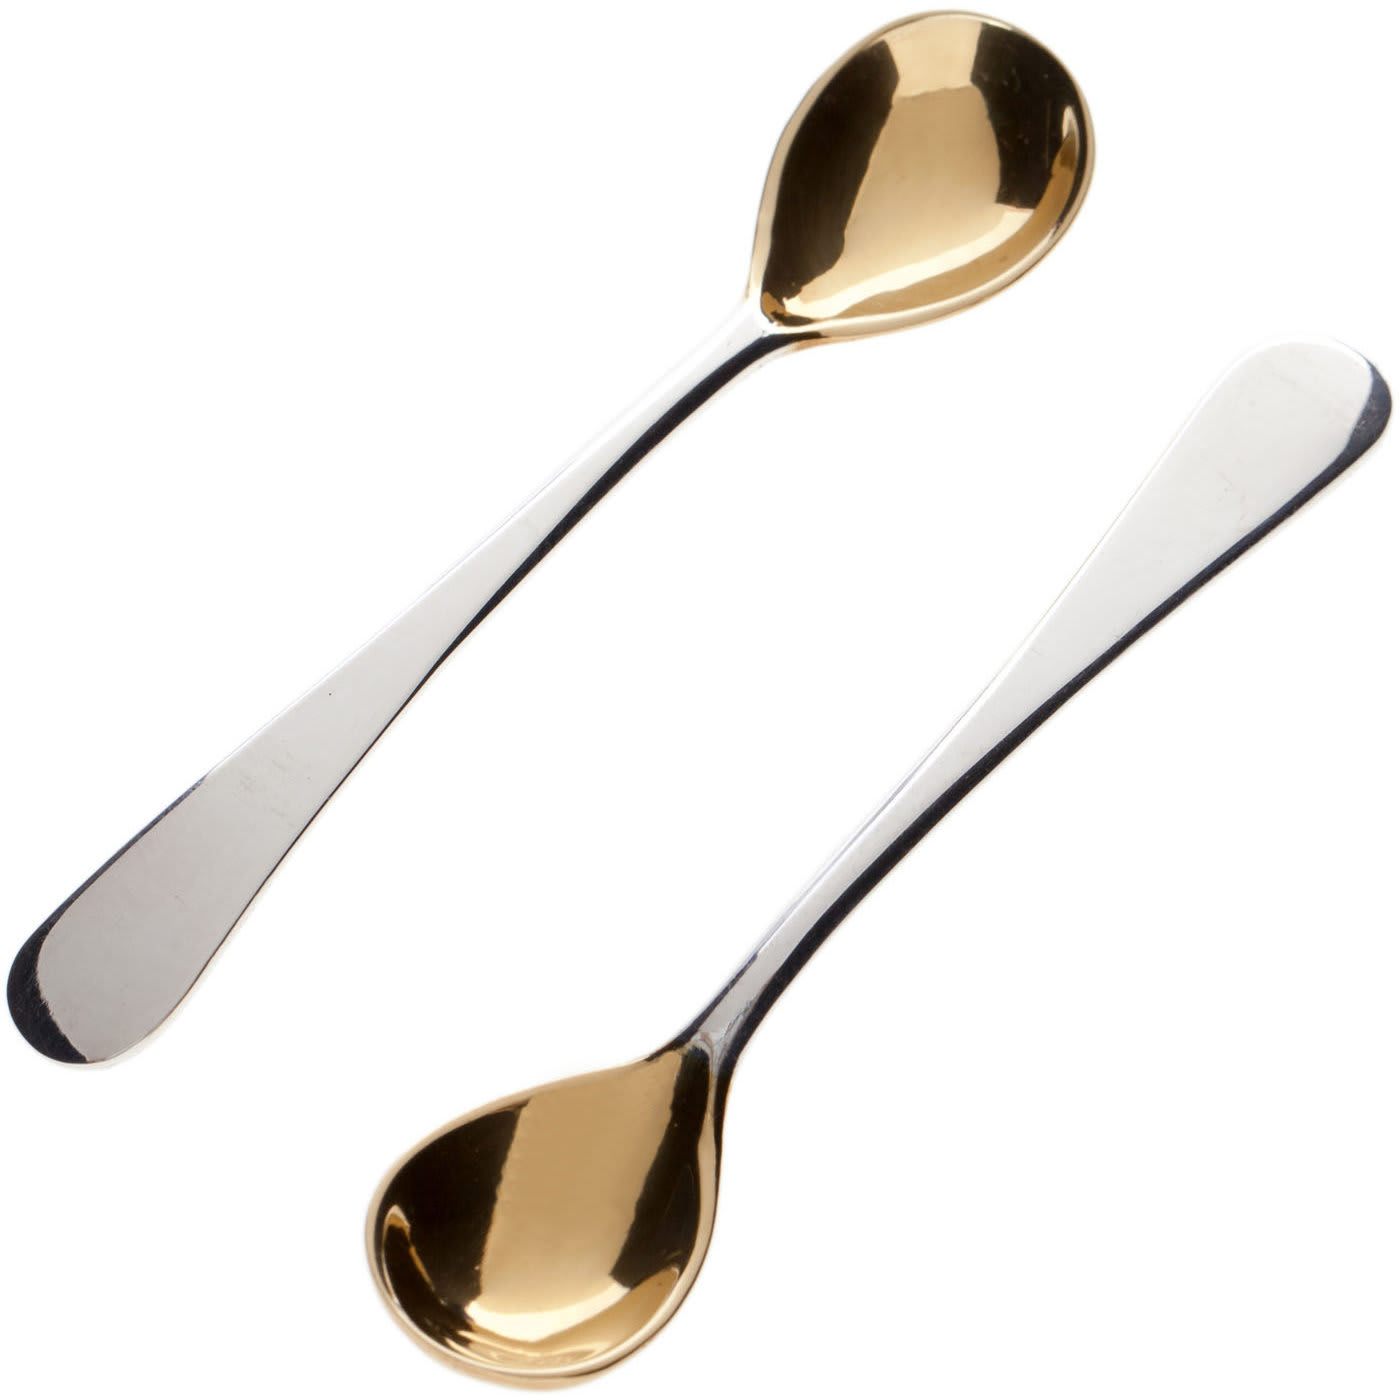 Set of 2 Salt Cellars with Spoons - Argentiere Pagliai